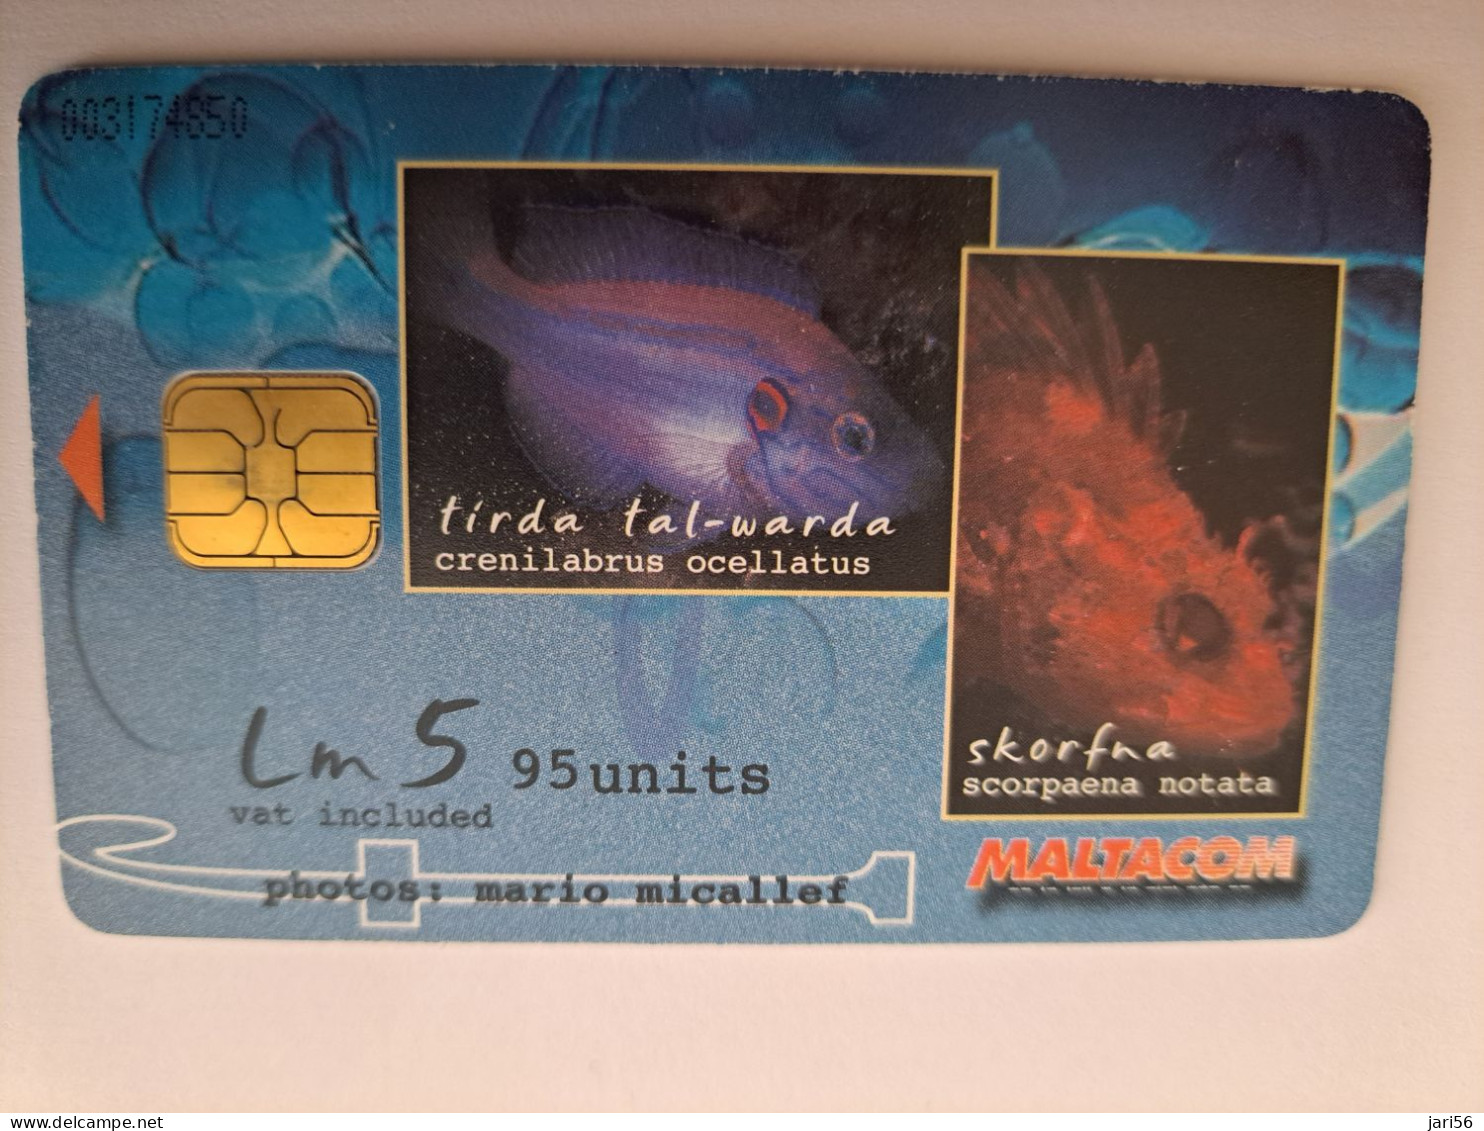 MALTA / SERIE  FISH / LM2, LM 2, LM 3, LM 5 / / FISH  .4X  CHIPCARD /  /   fine used    ** 15572**